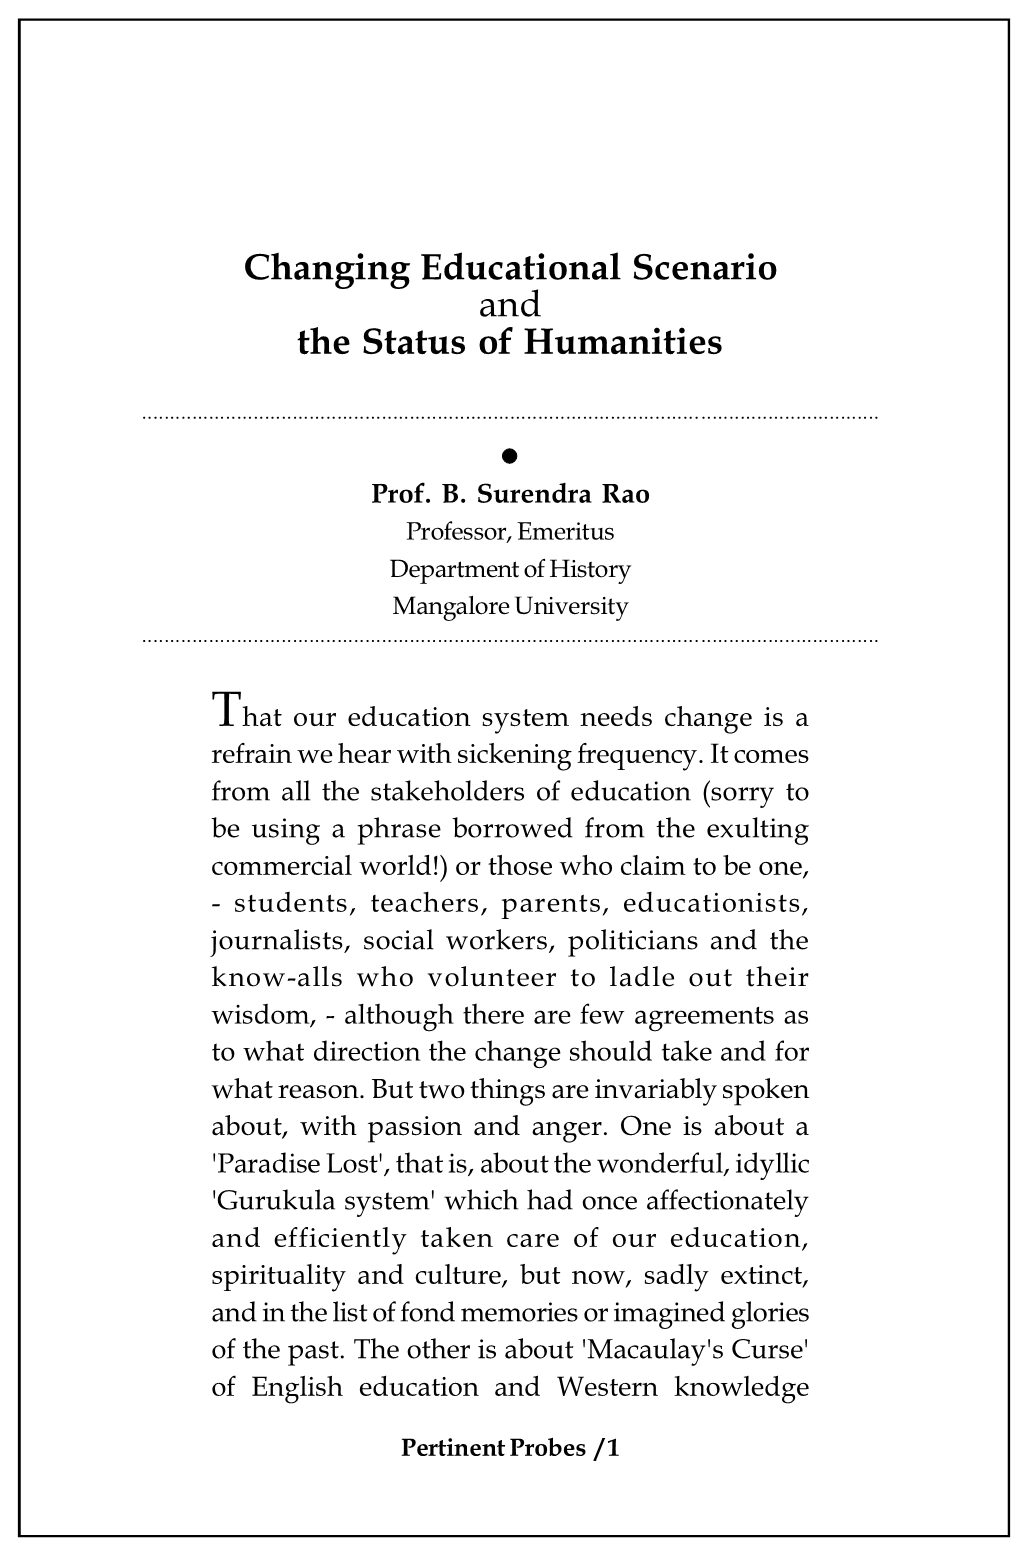 Changing Educational Scenario and the Status of Humanities